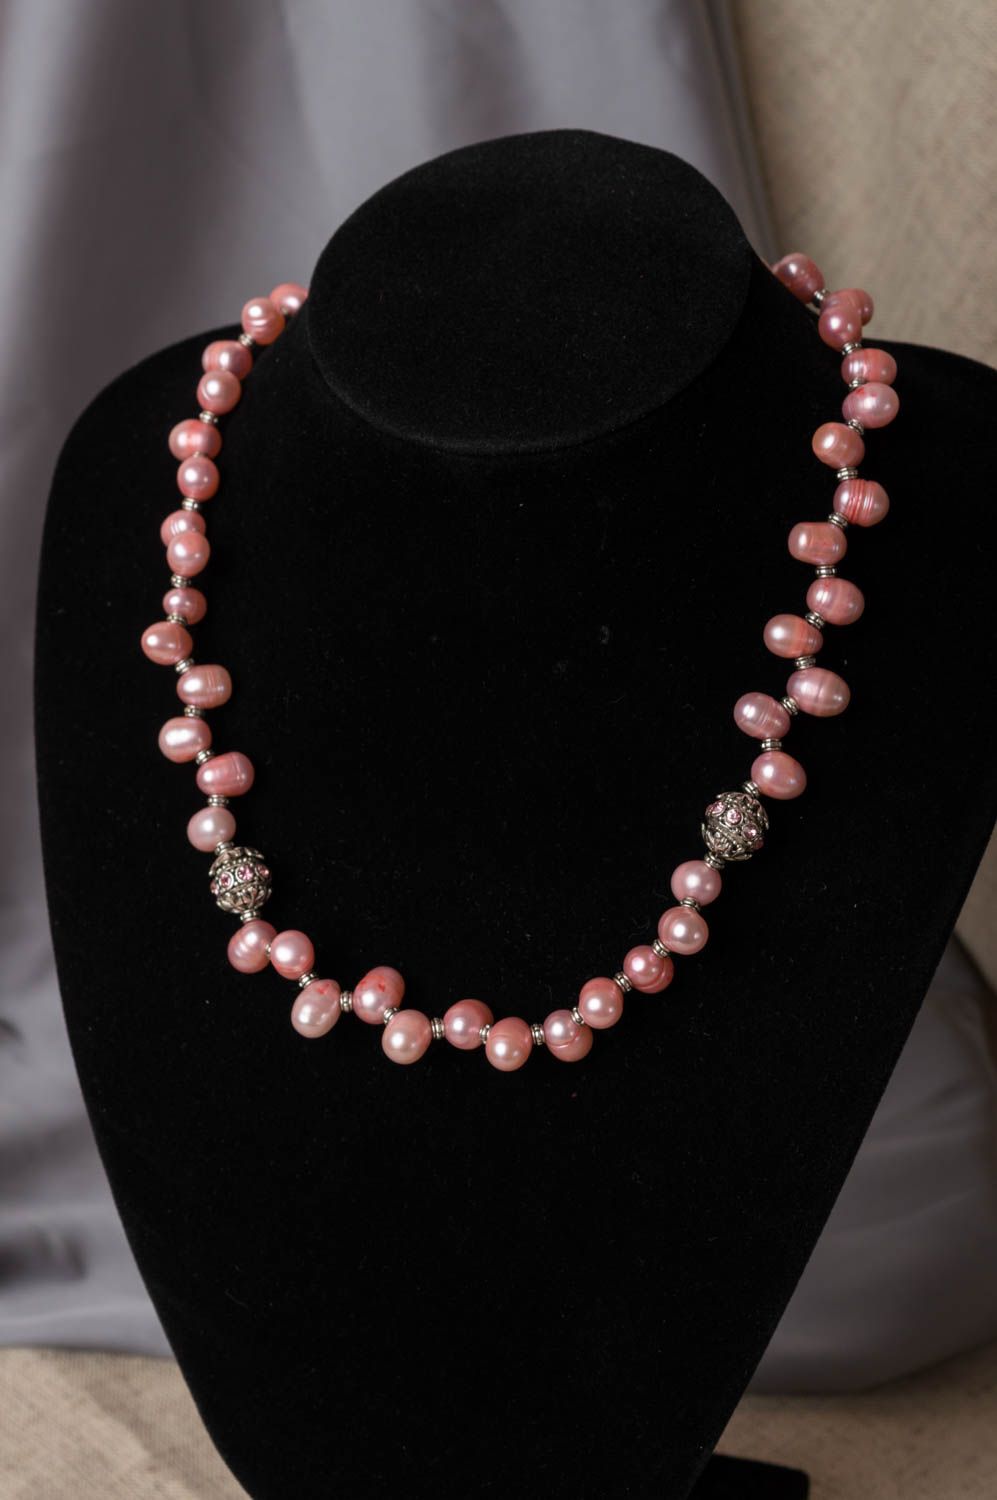 Handmade elegant designer necklace with pink pearls and latten elements for lady photo 1